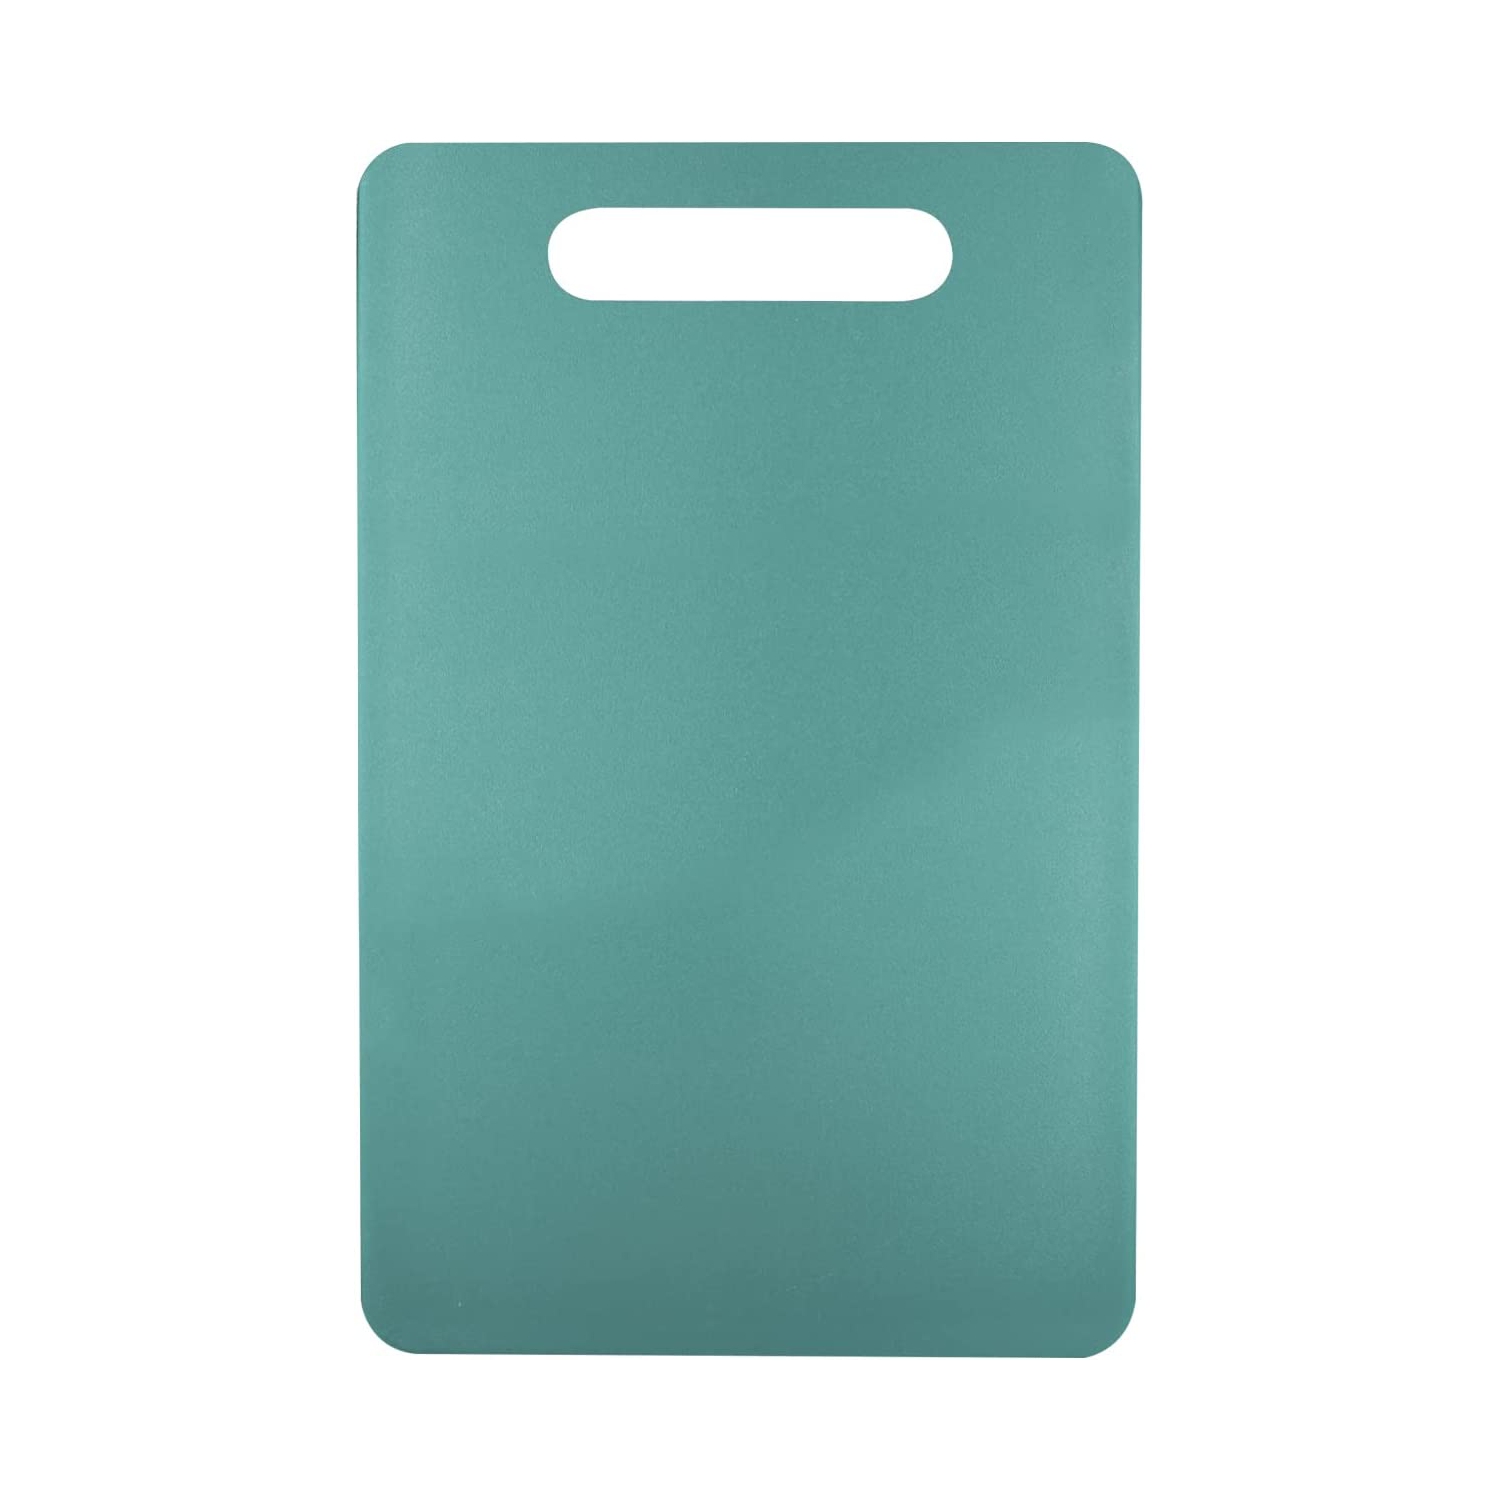 Plastic Utility Cutting Board with Handles, Food Safe PP Material, BPA Free, Dishwasher Safe, Thick Chopping